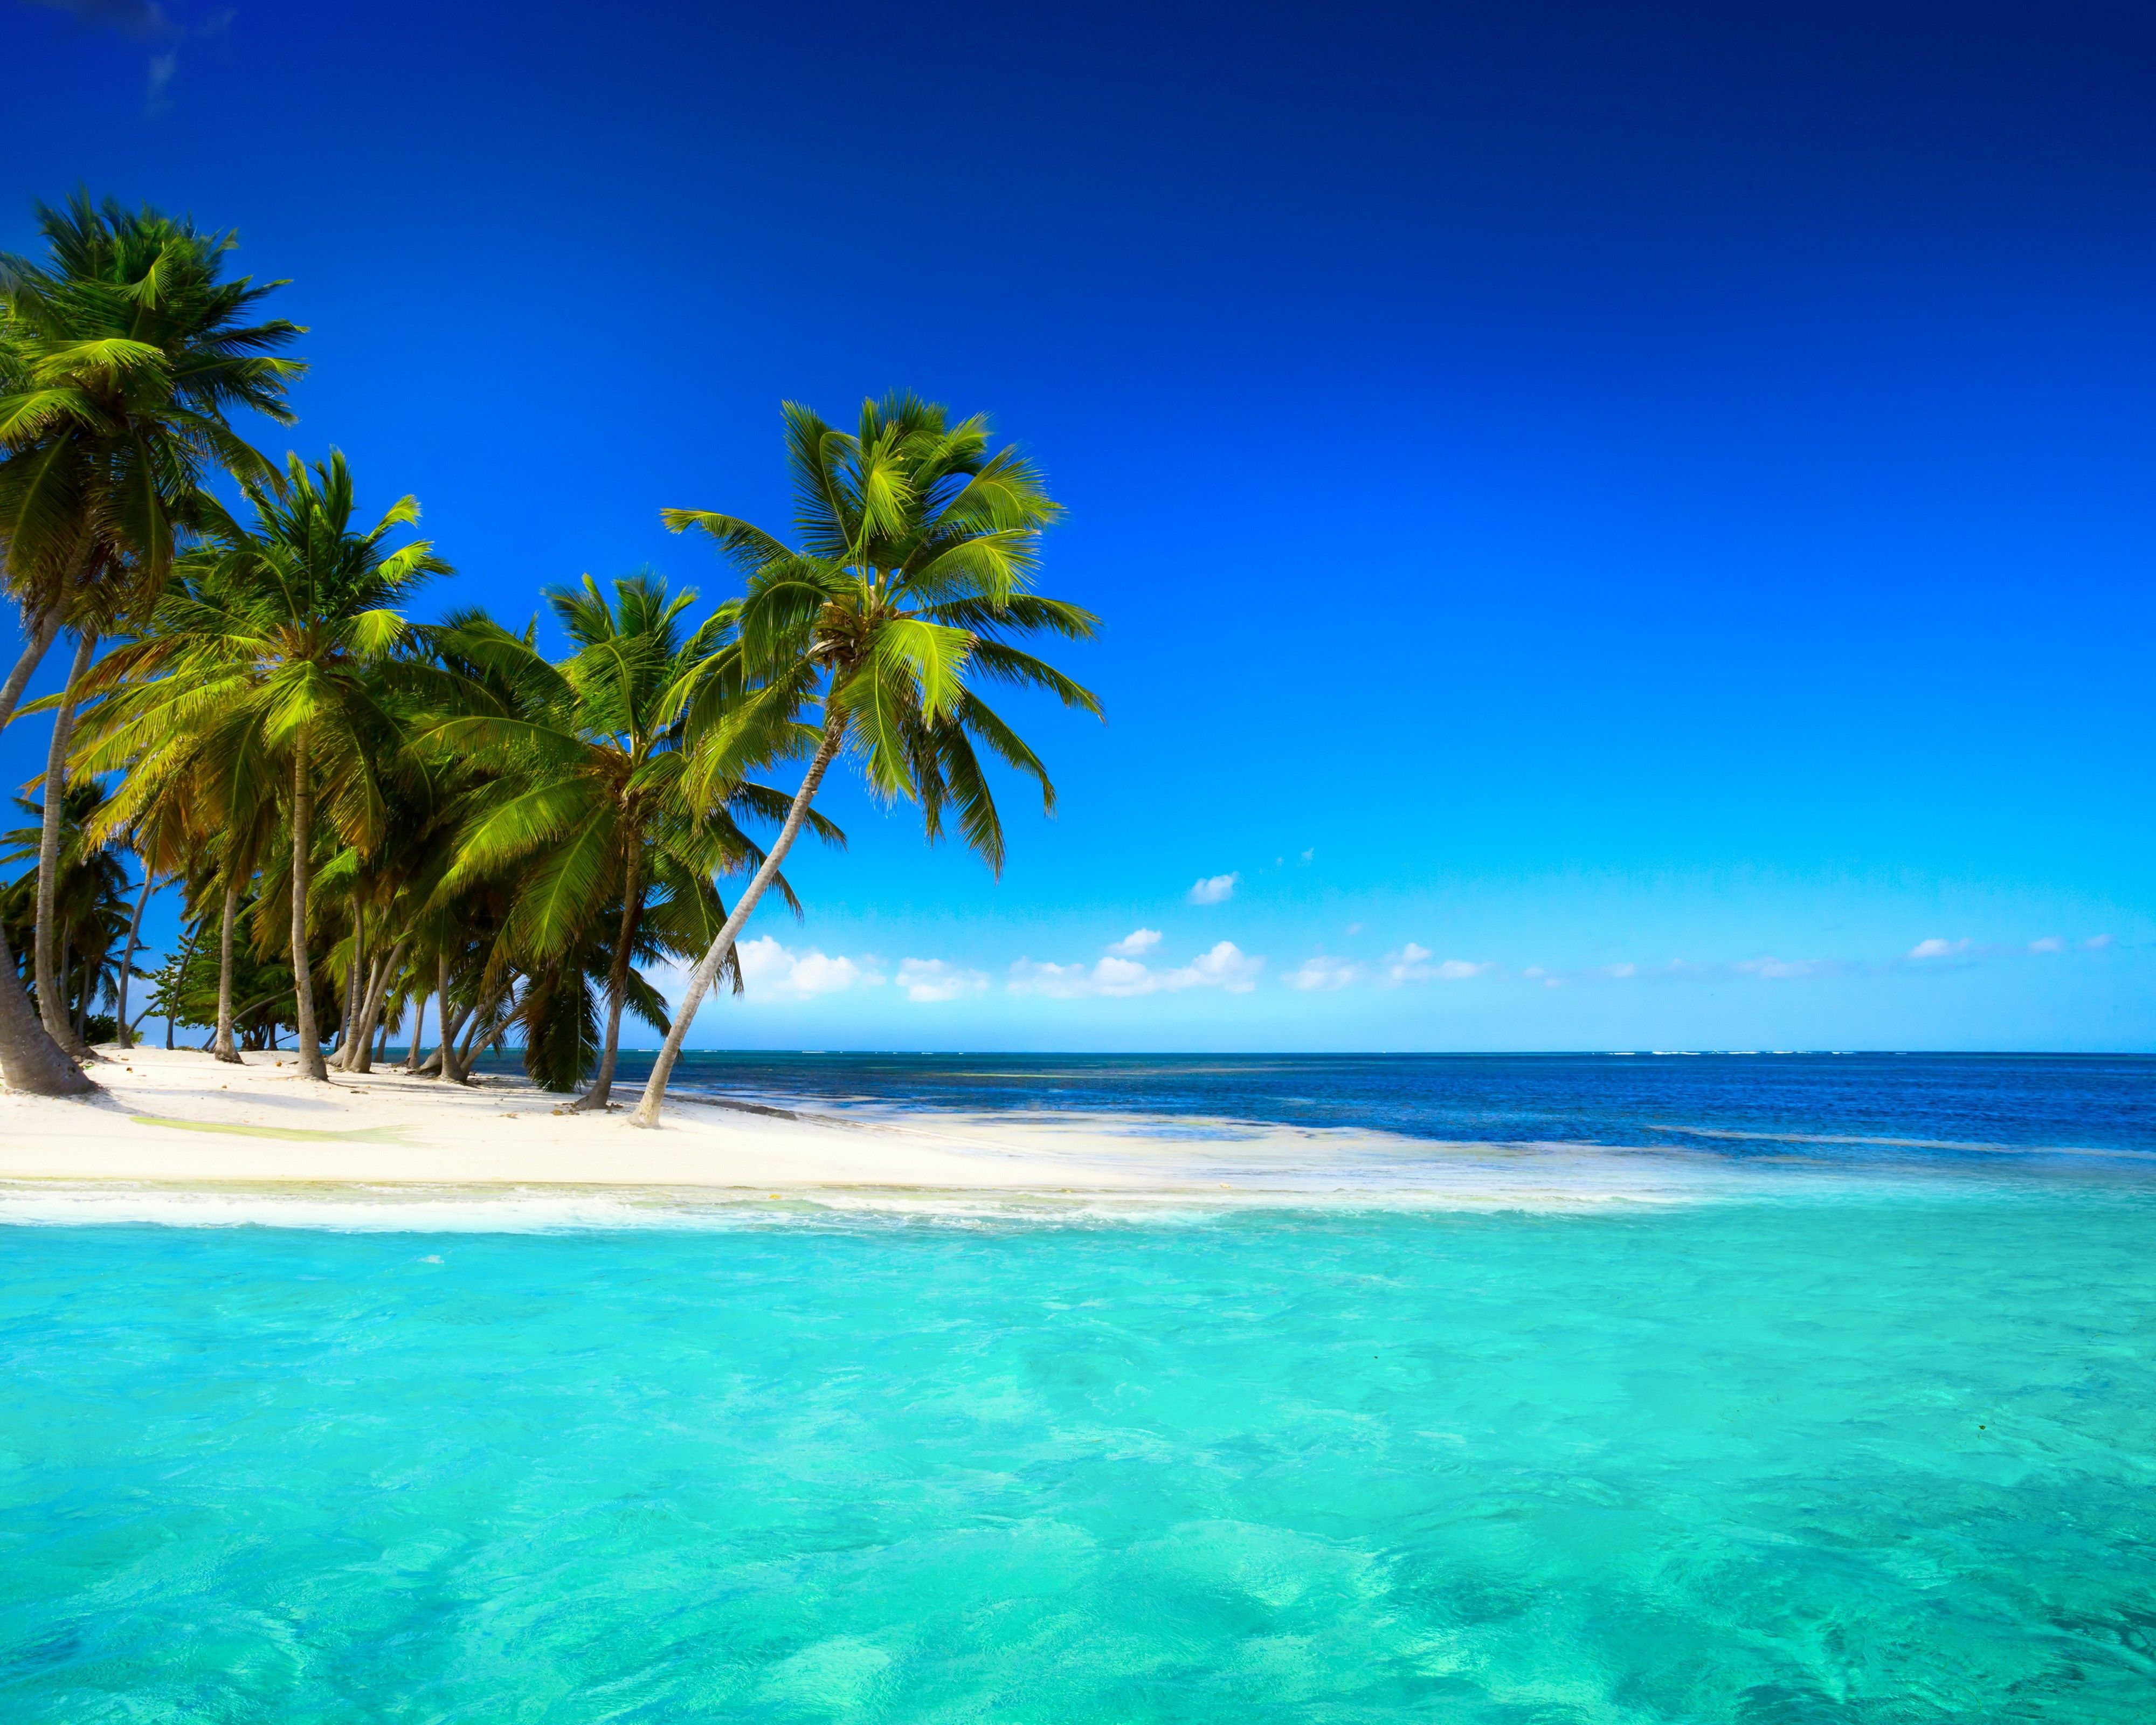 Tropical Beach Paradise Island Wallpapers - Wallpaper Cave